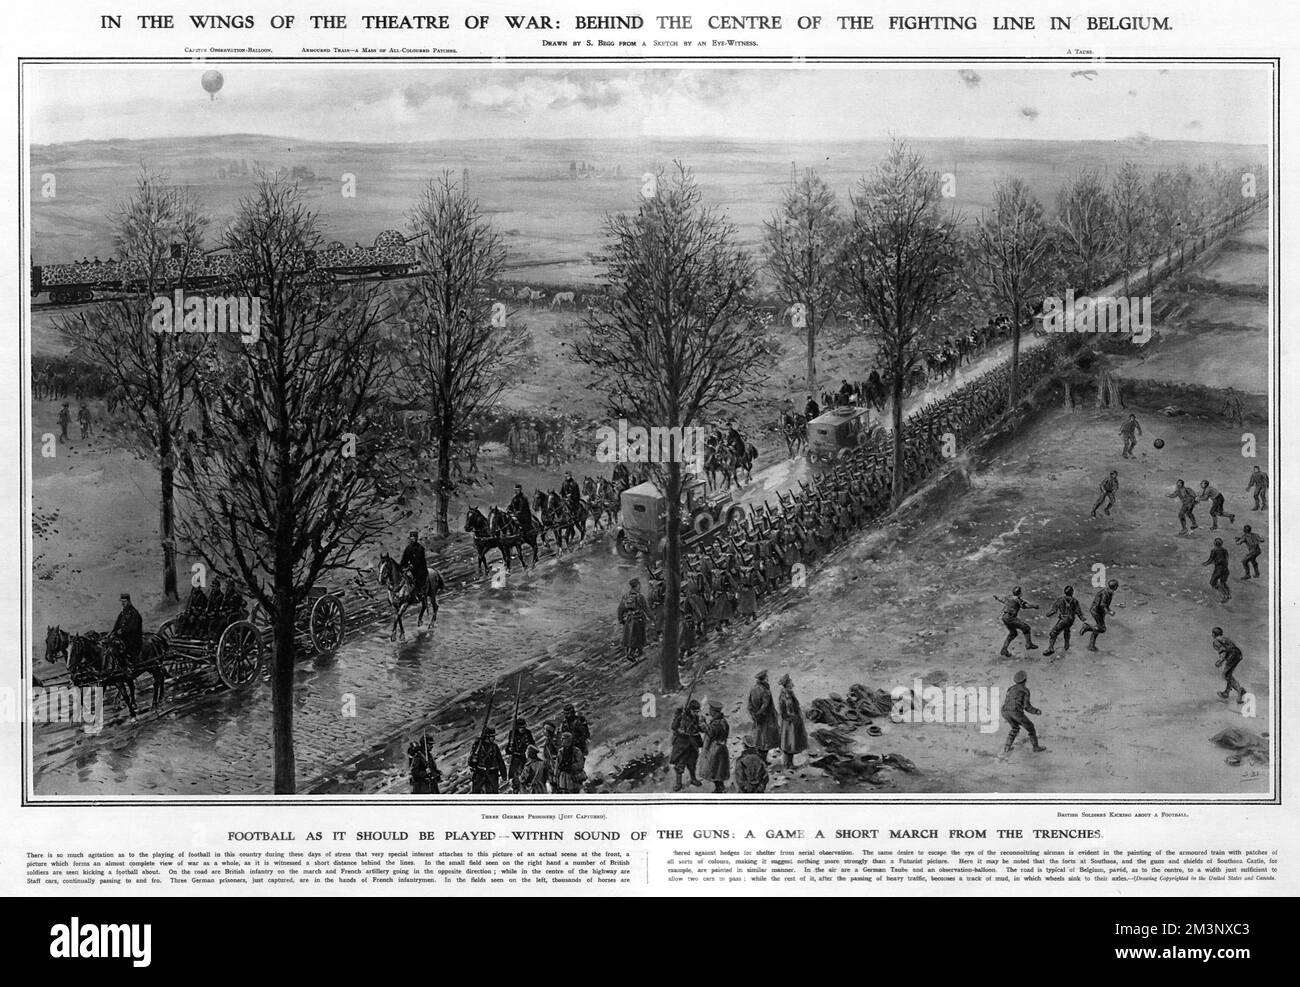 In the Wings of the Theatre of War: Behind the Centre of the Fighting Line in Belgium. A scene of much activity near the front line in Belgium. Towards the top left, a camouflaged armoured train passes by. In the fields beyond the trees horses are tethered . Along the road British infantry and French artillery units pass each other with staff cars passing between them. In the foreground three captured German prisoners are under guard. To the right of the road British soldiers play a casual game of football.  December 1914 Stock Photo